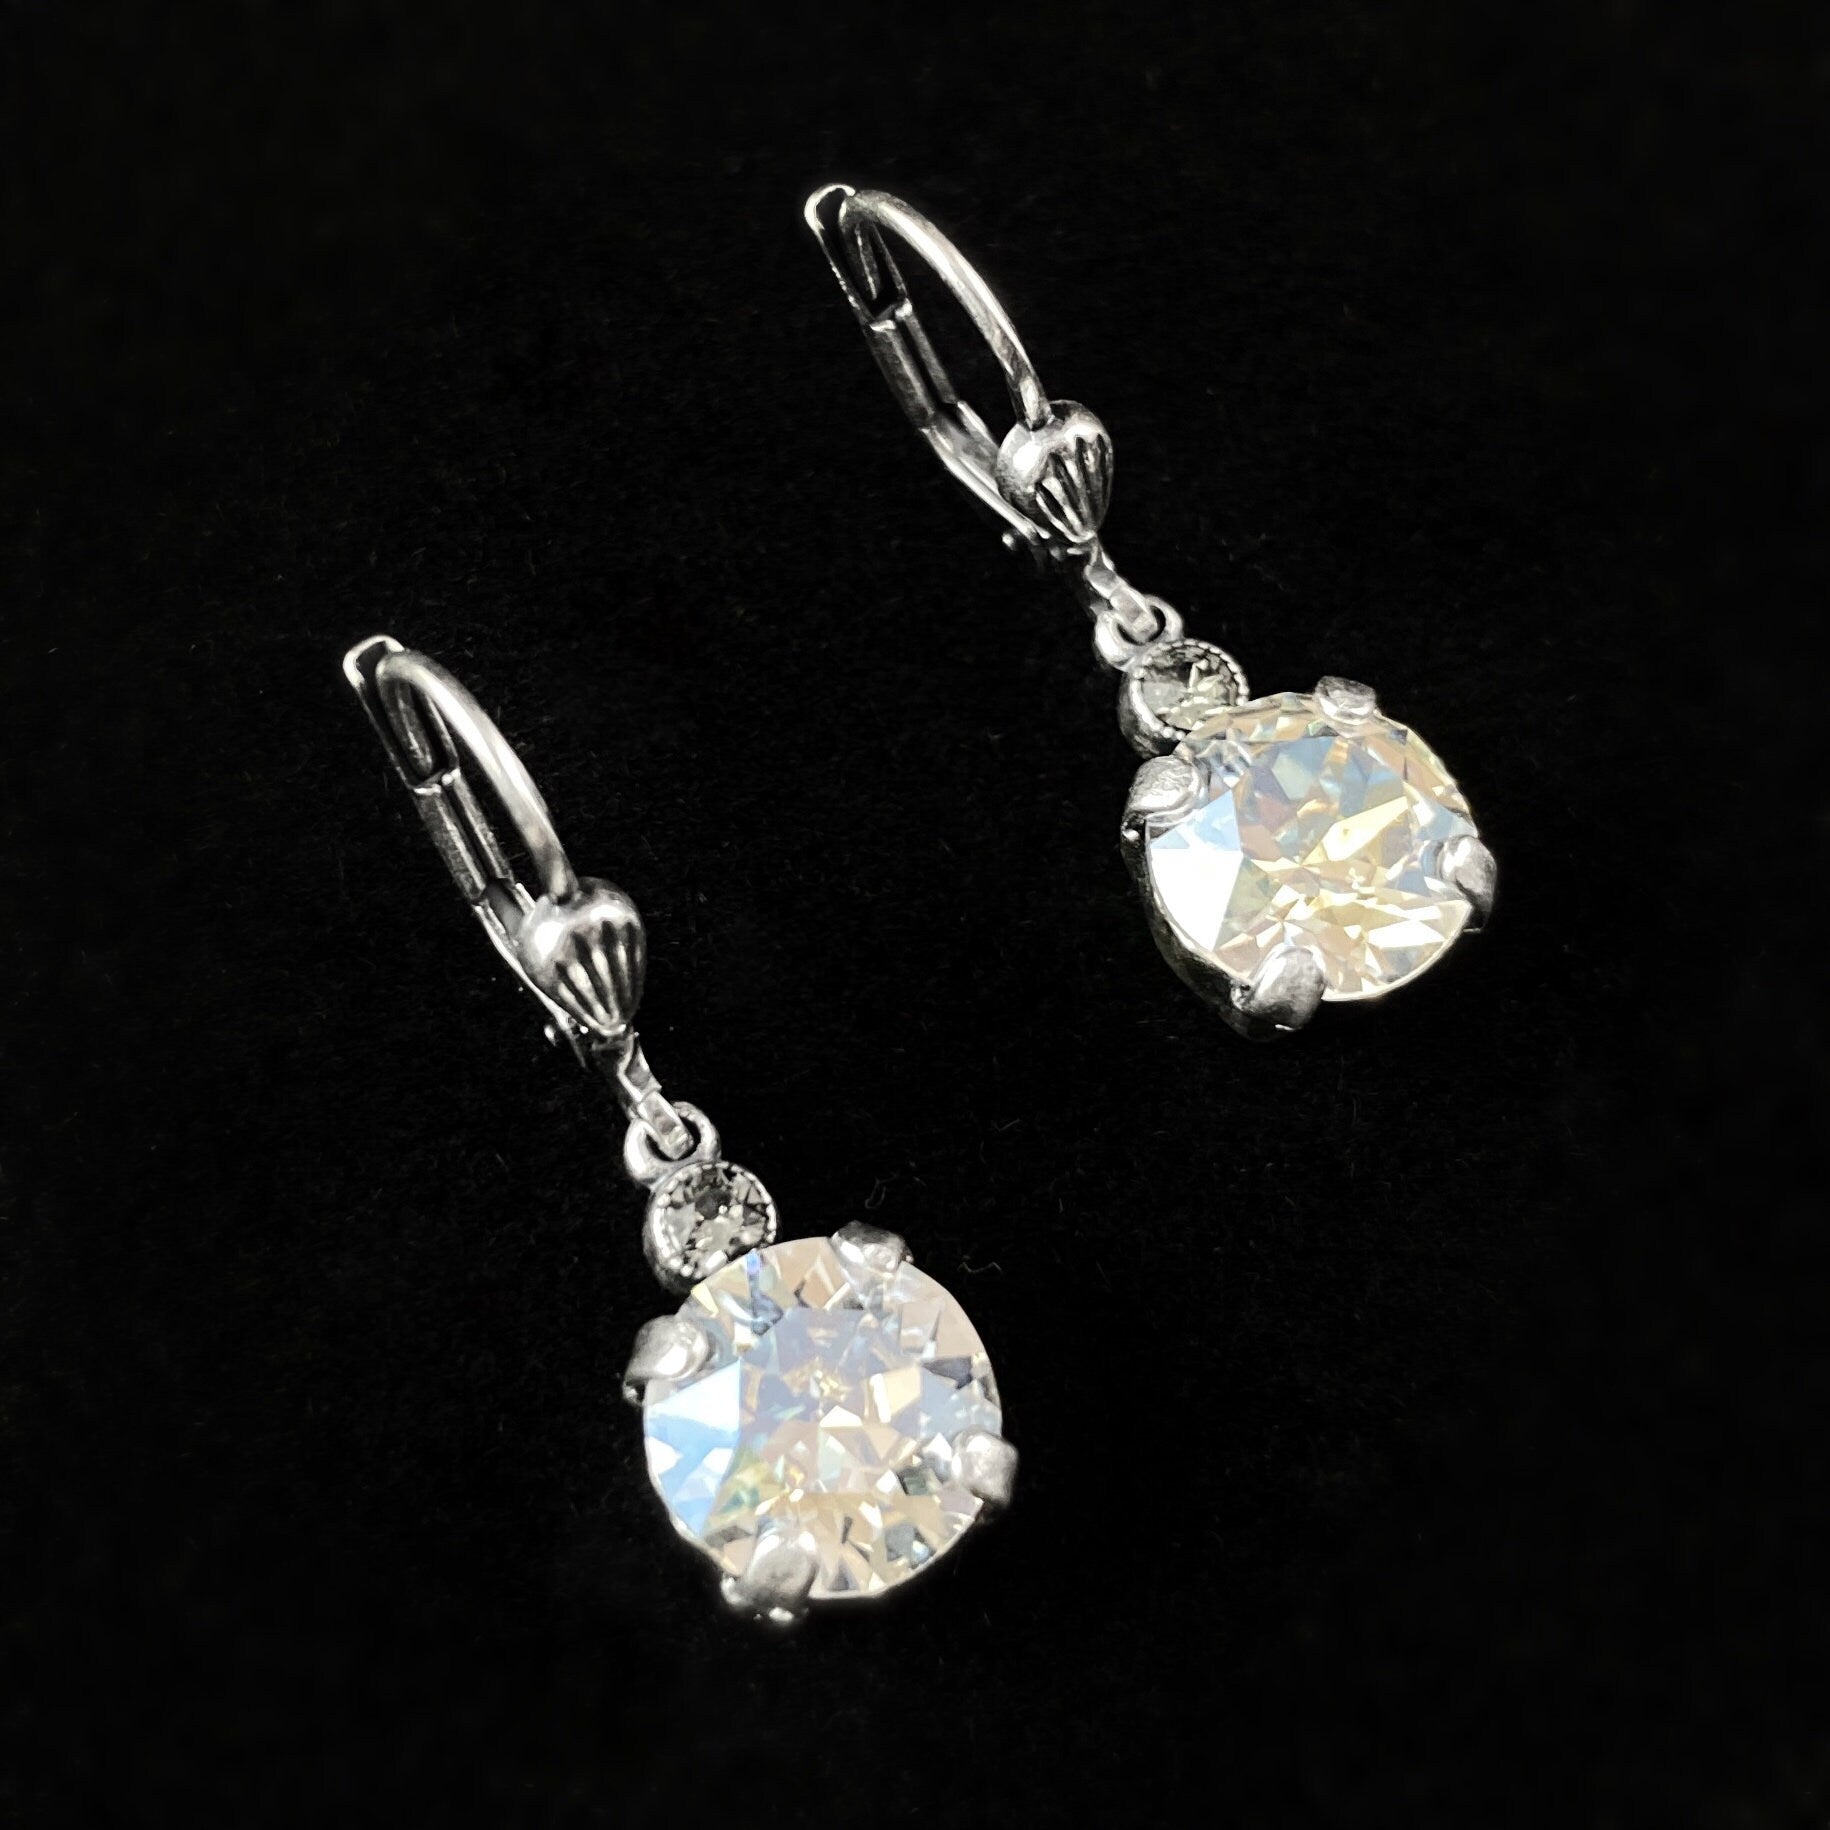 Clear Circle Swarovski Crystal Drop Earrings with Tiny Crystal Detailing- La Vie Parisienne by Catherine Popesco